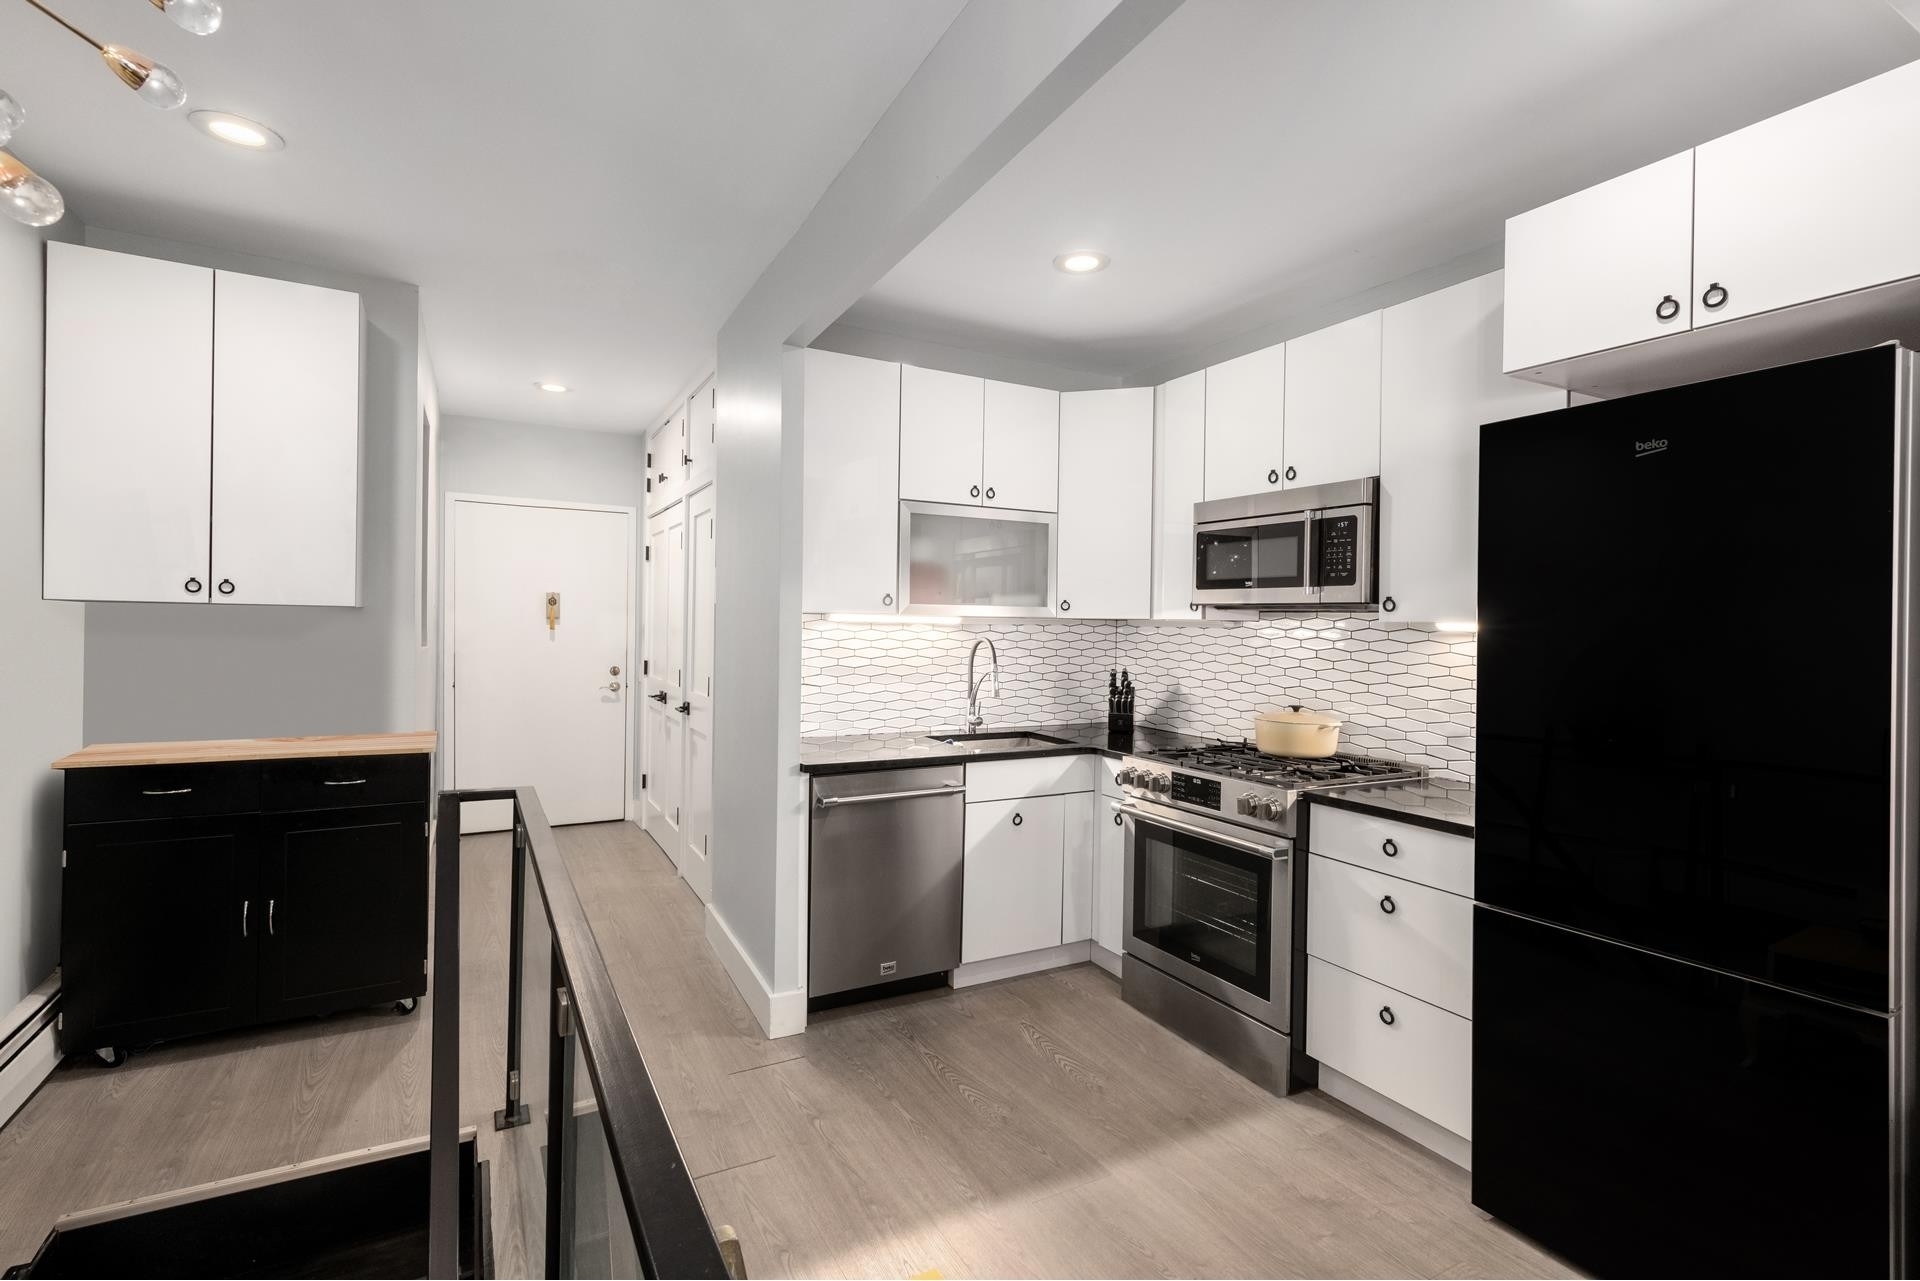 Co-op Properties for Sale at 788 NINTH AVE, GARDEN Hell's Kitchen, New York, New York 10019